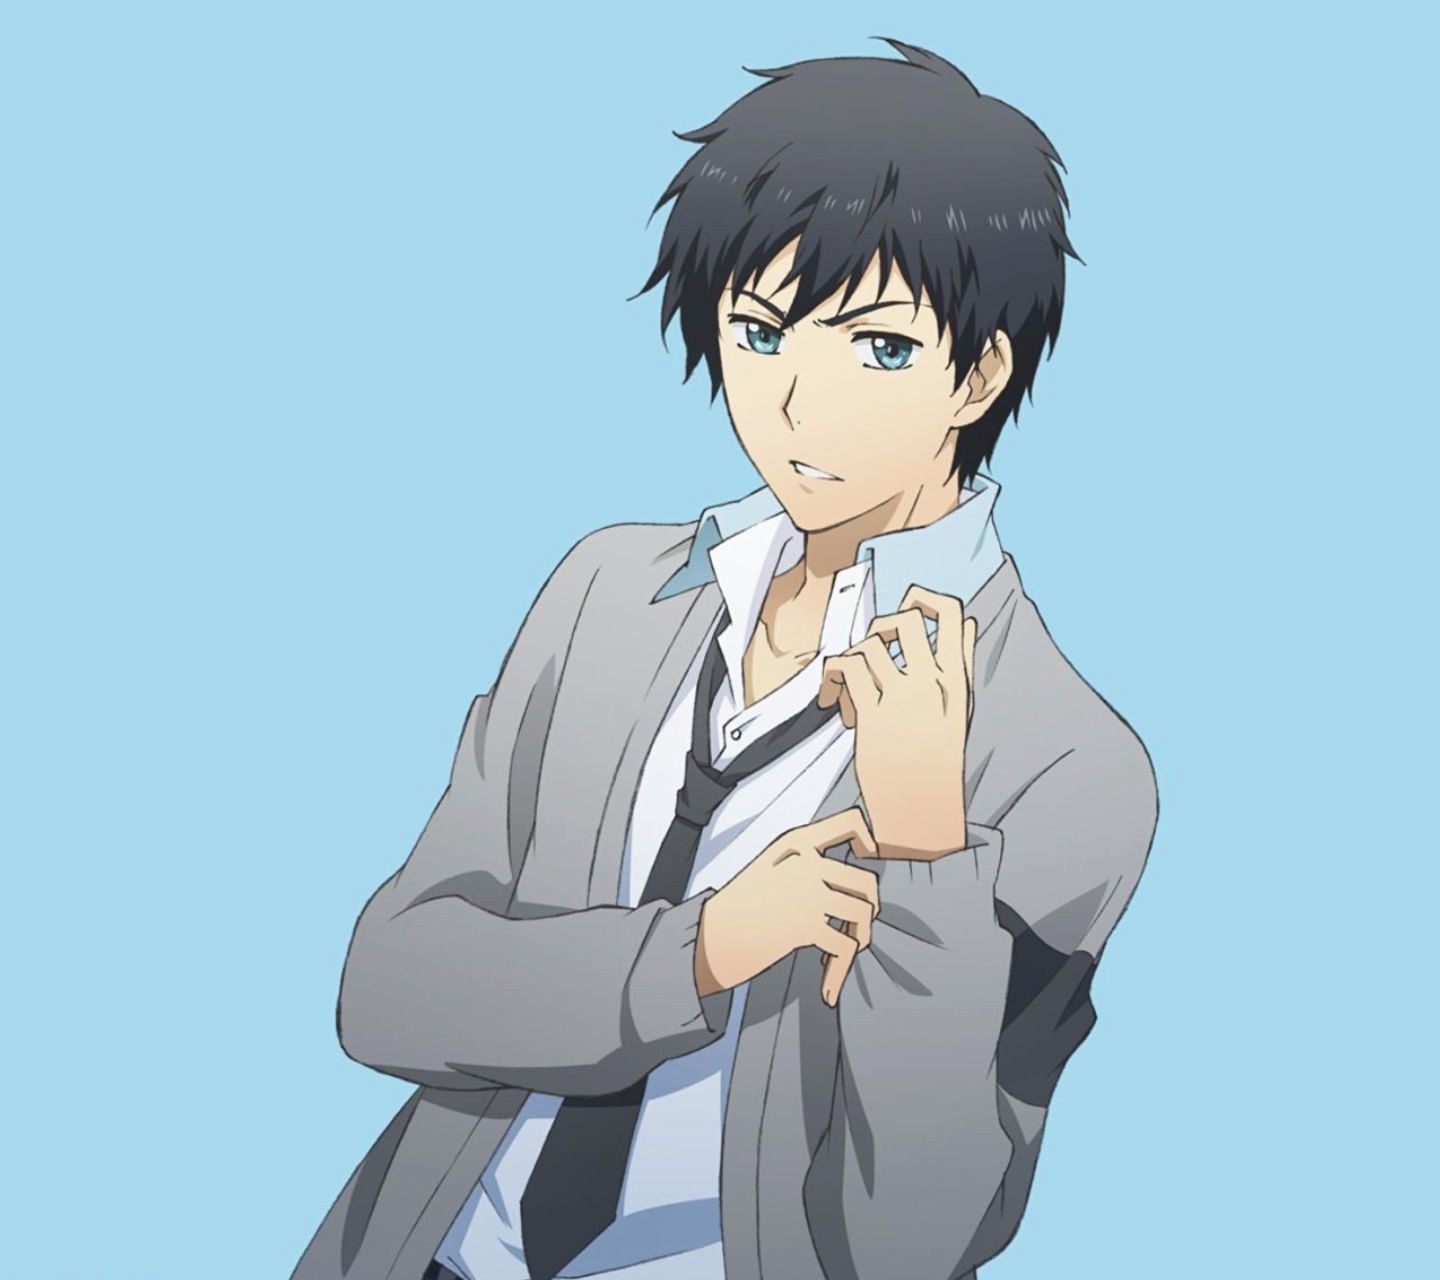 Relife Androidスマホ壁紙 スクロール対応 1 アニメ壁紙ネット Pc Android Iphone壁紙 画像